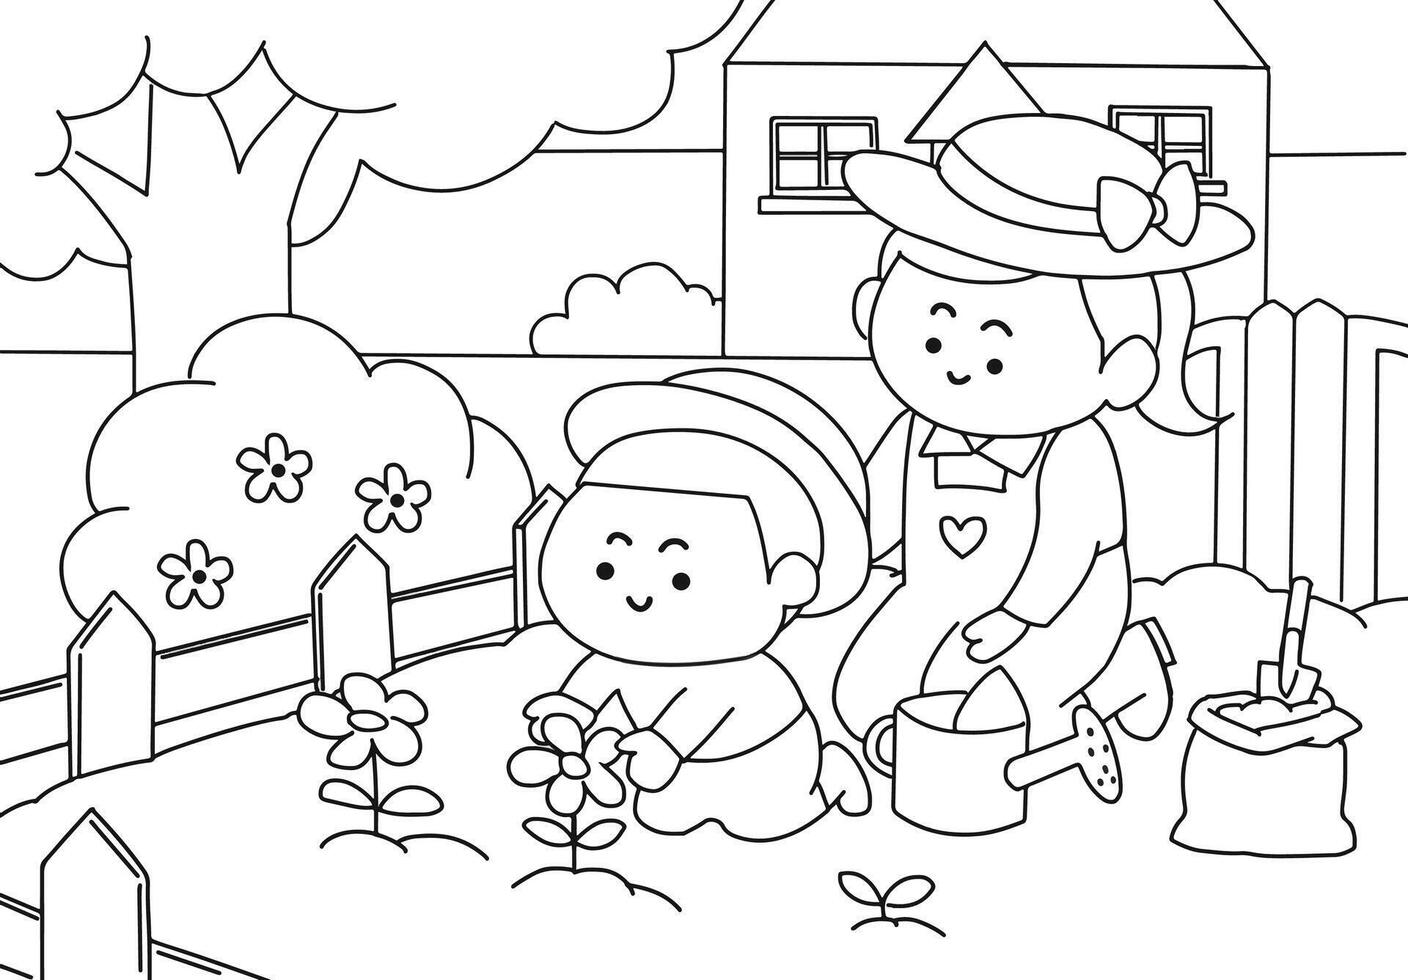 Kid and his mom plant on the garden, coloring book. vector